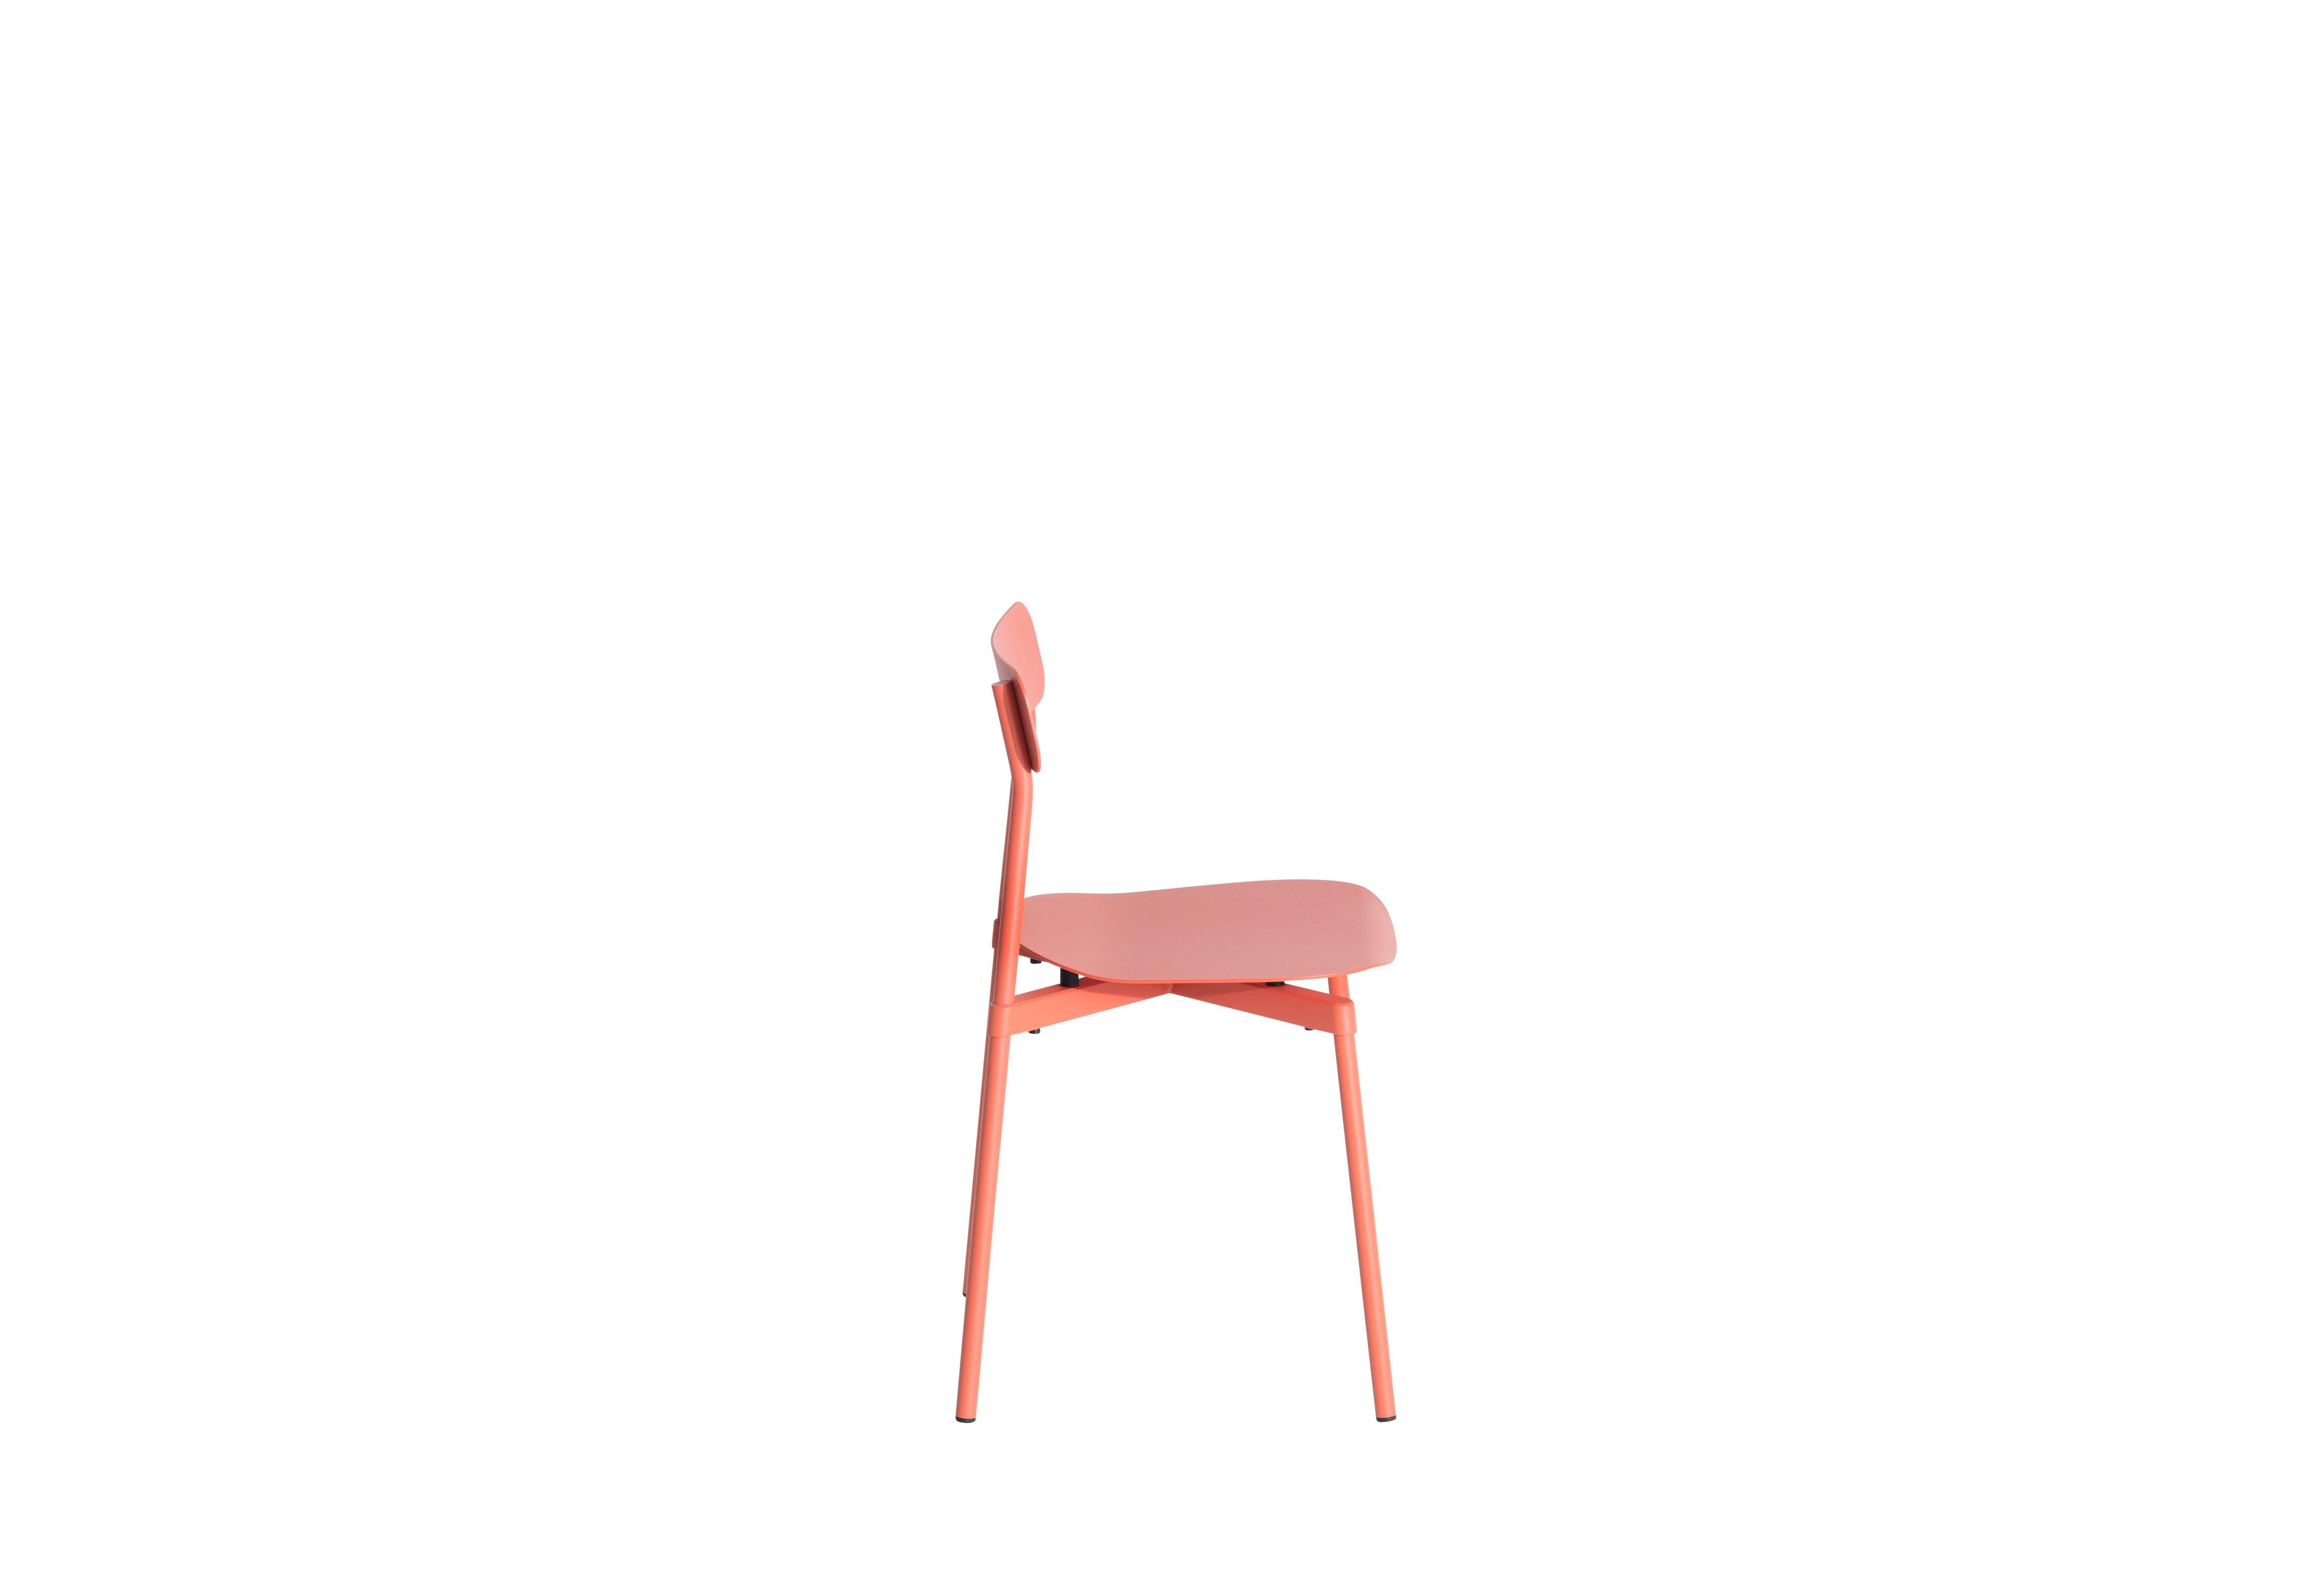 Petite Friture Fromme Chair in Coral Aluminium by Tom Chung, 2019

The Fromme chair stands out by its pure line and compact design. Absorbers placed under the seating gives a soft and very comfortable flexibility to the chair. Made from aluminium,